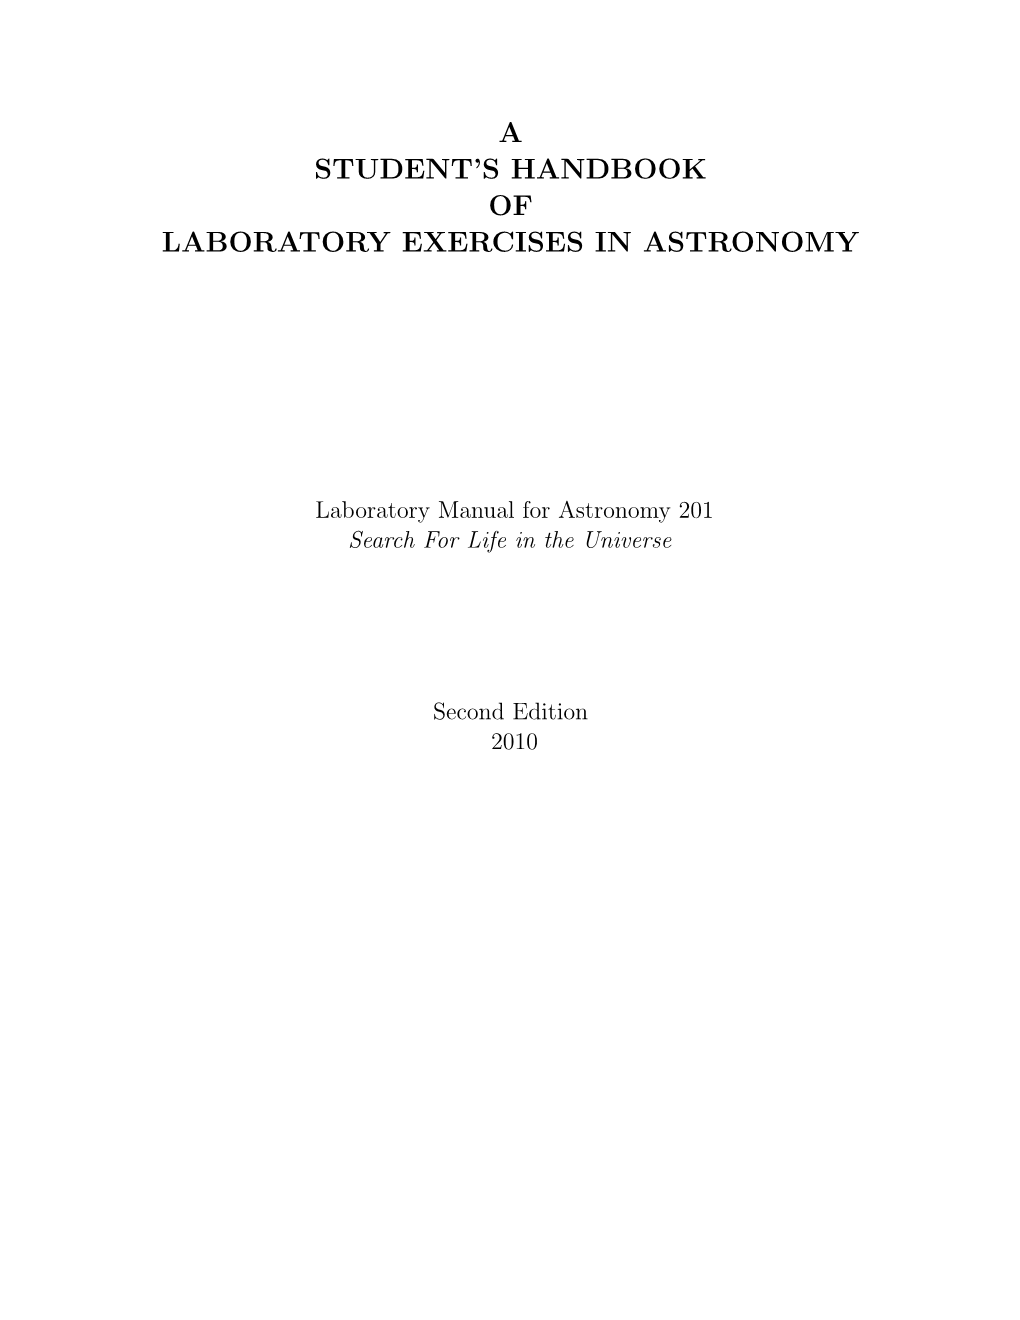 A Student's Handbook of Laboratory Exercises In